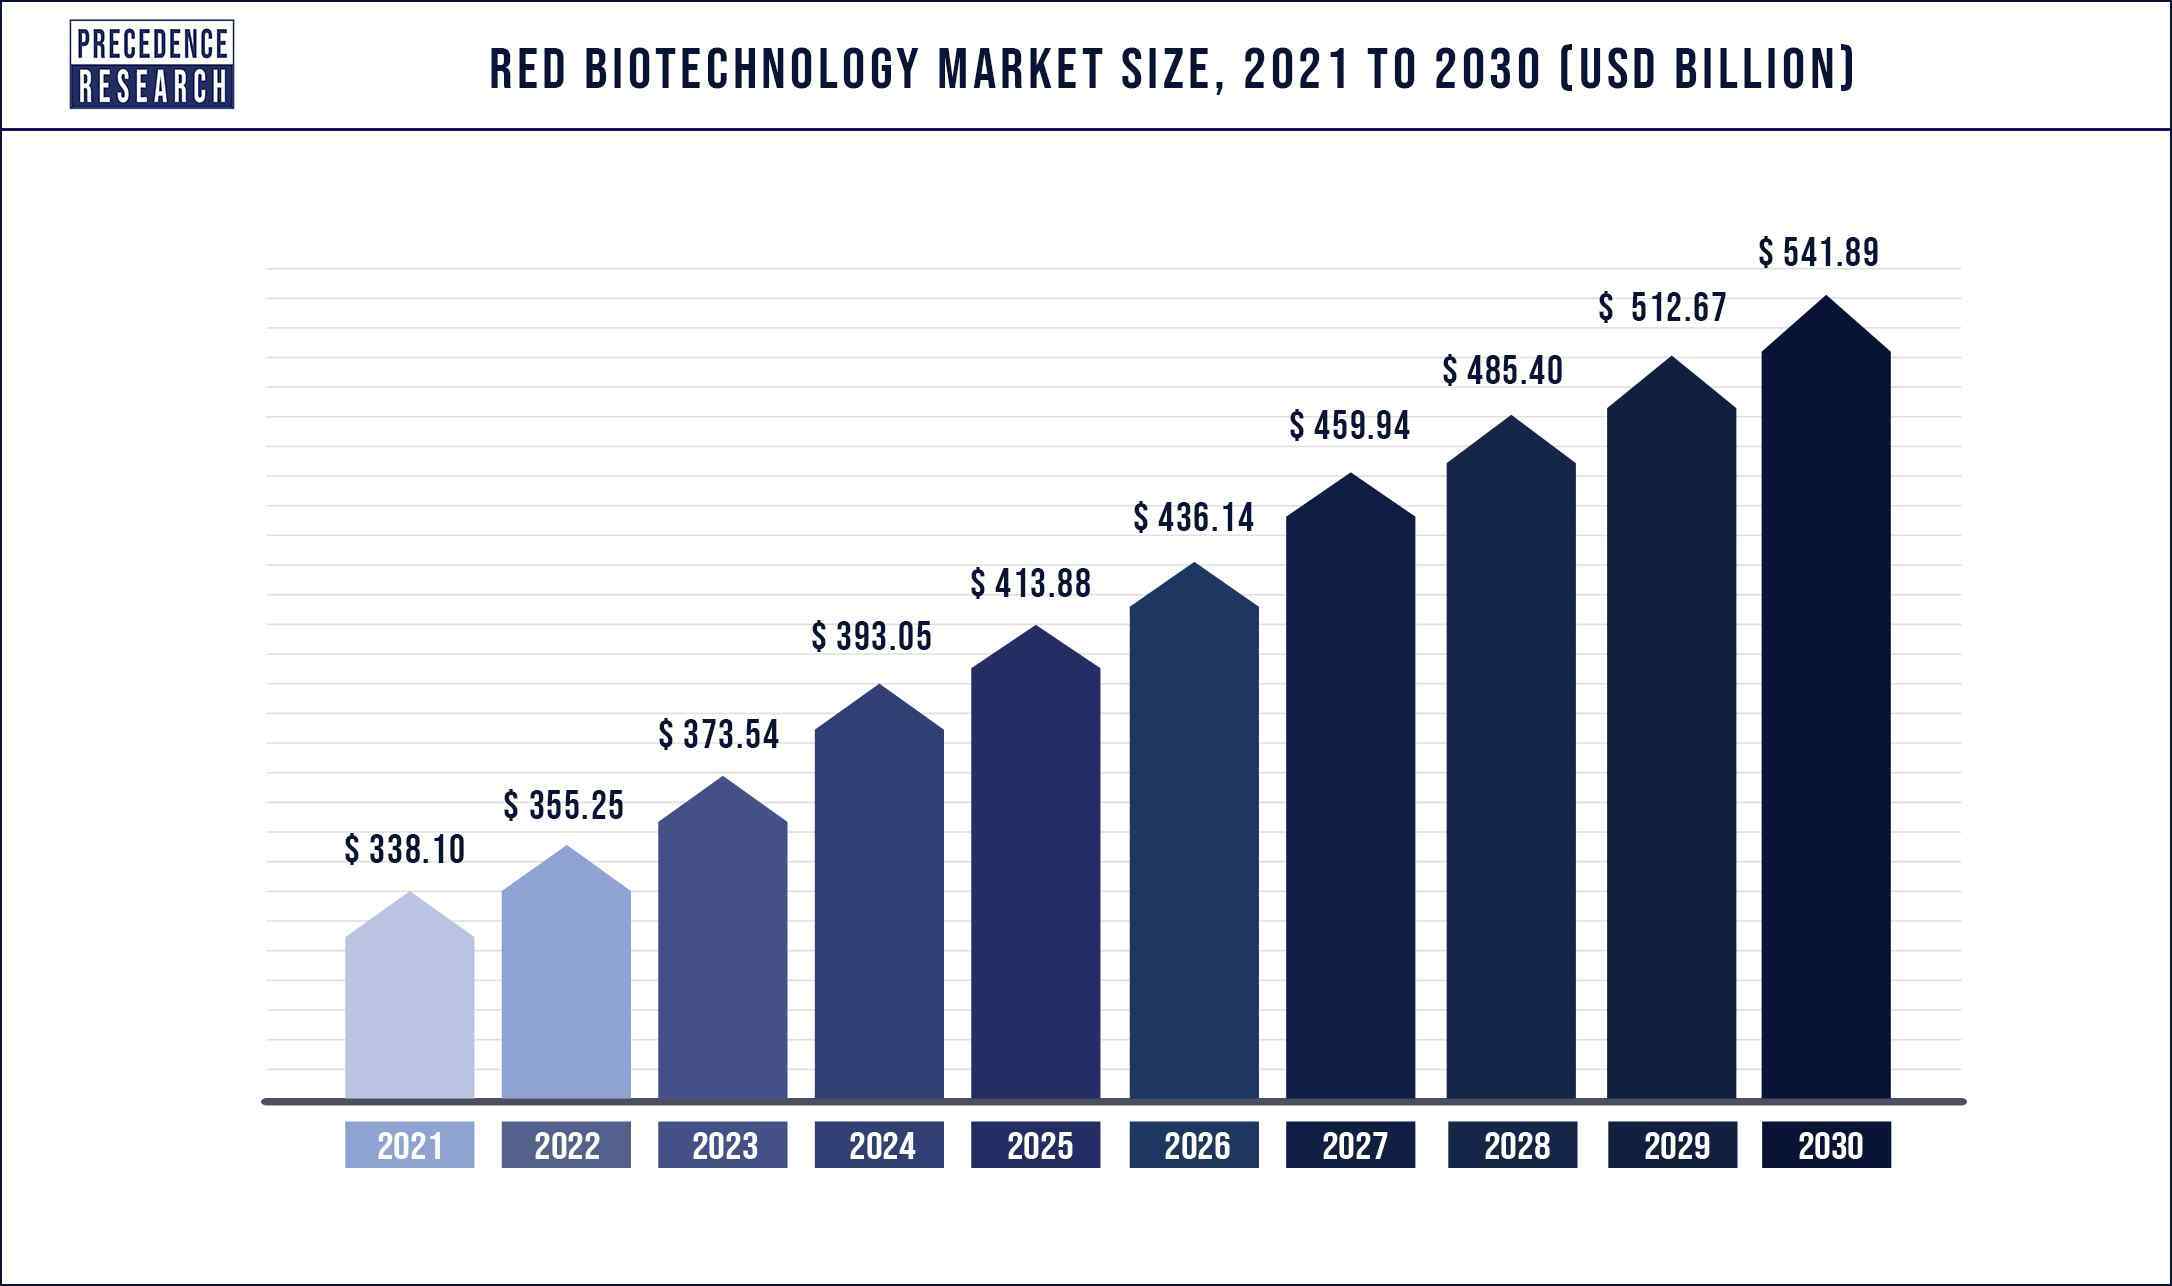 Red Biotechnology Market Size 2021 to 2030